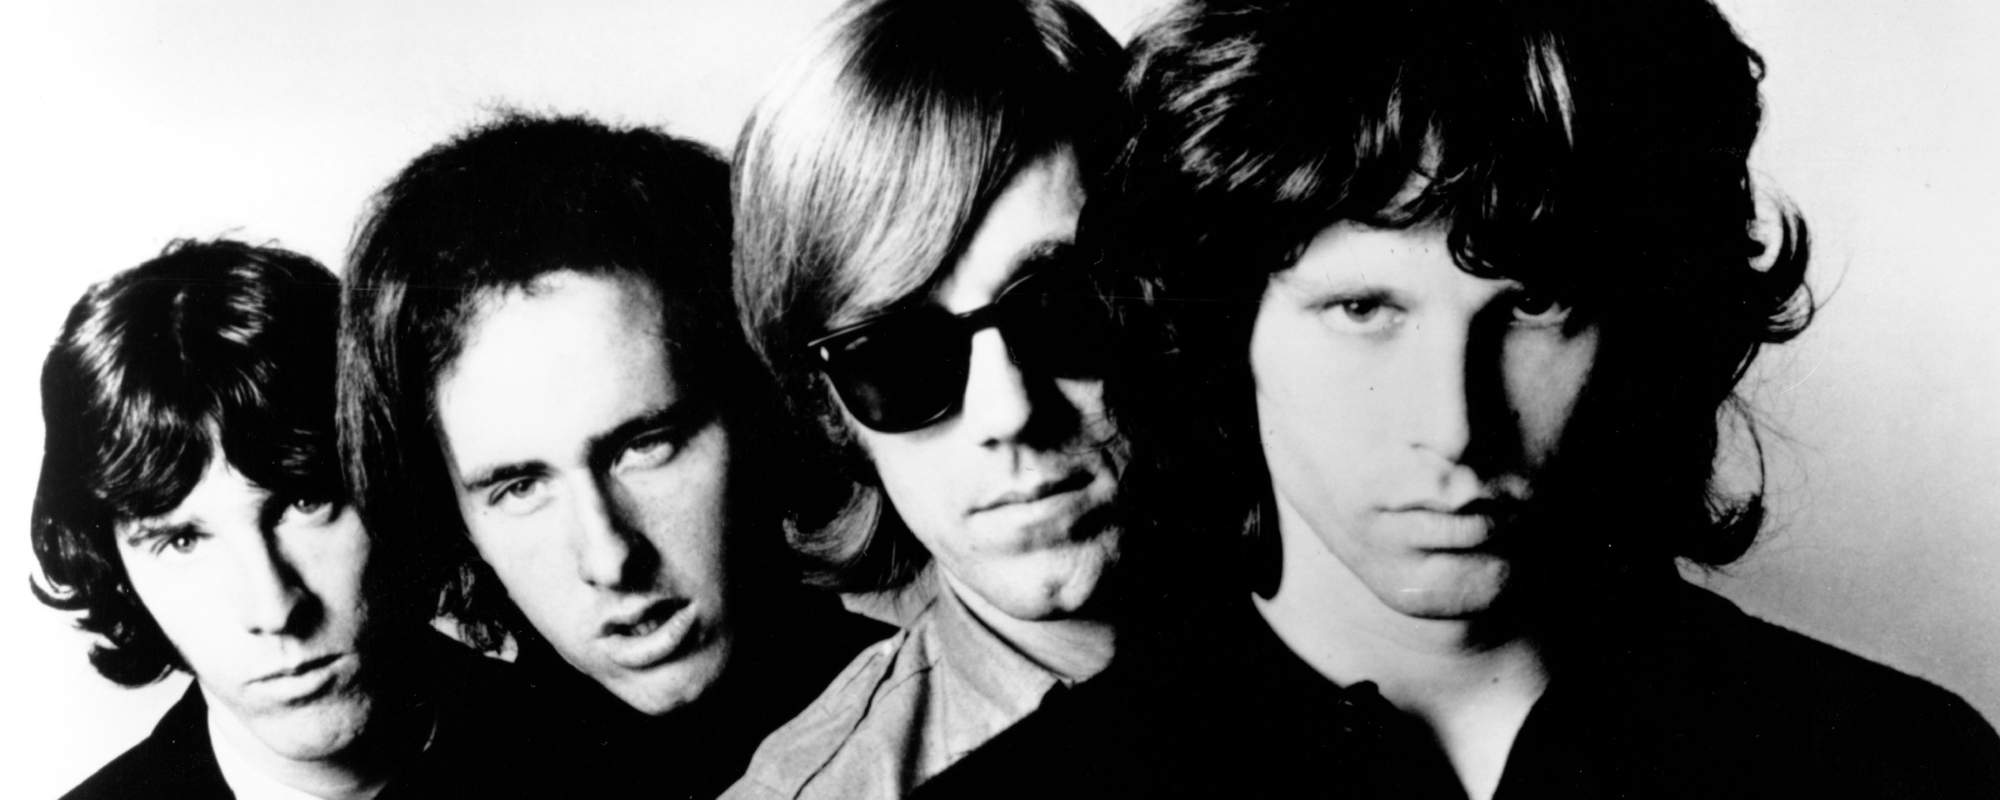 The Surprising Operatic Origins of The Doors' "Alabama Song (Whisky Bar)"